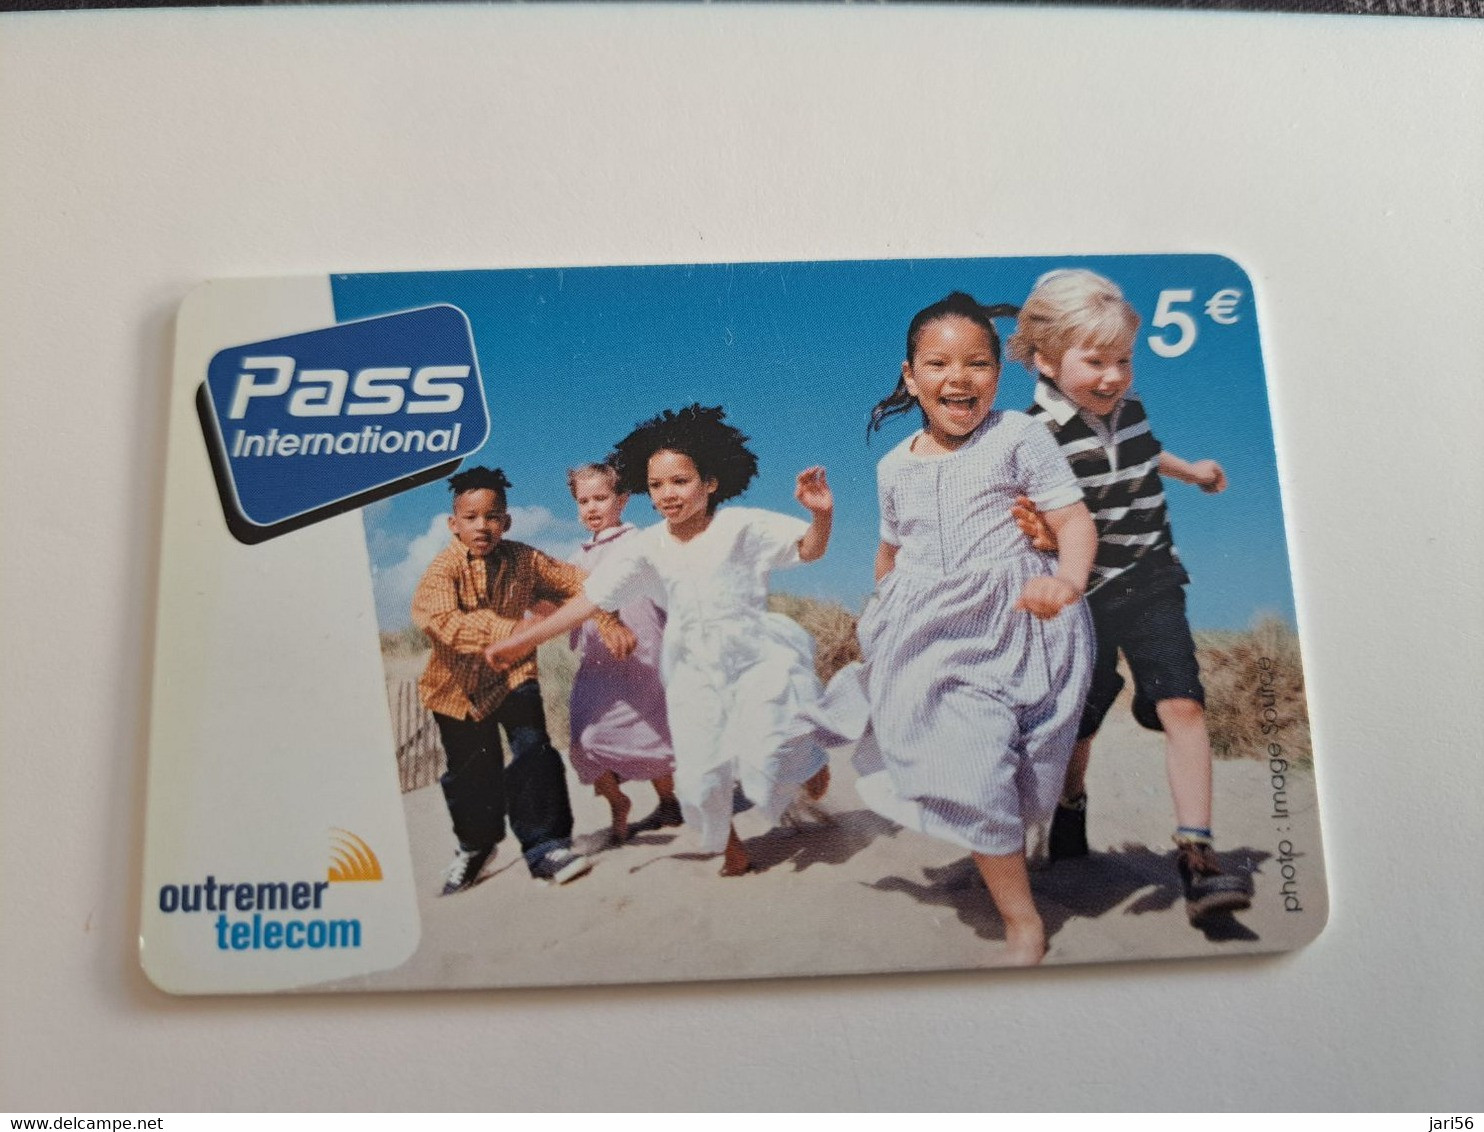 Phonecard St Martin French OUTREMER TELECOM   PASS Telecom  PLAYING CHILDREN  5 EURO  ** 9681 ** - Antilles (French)